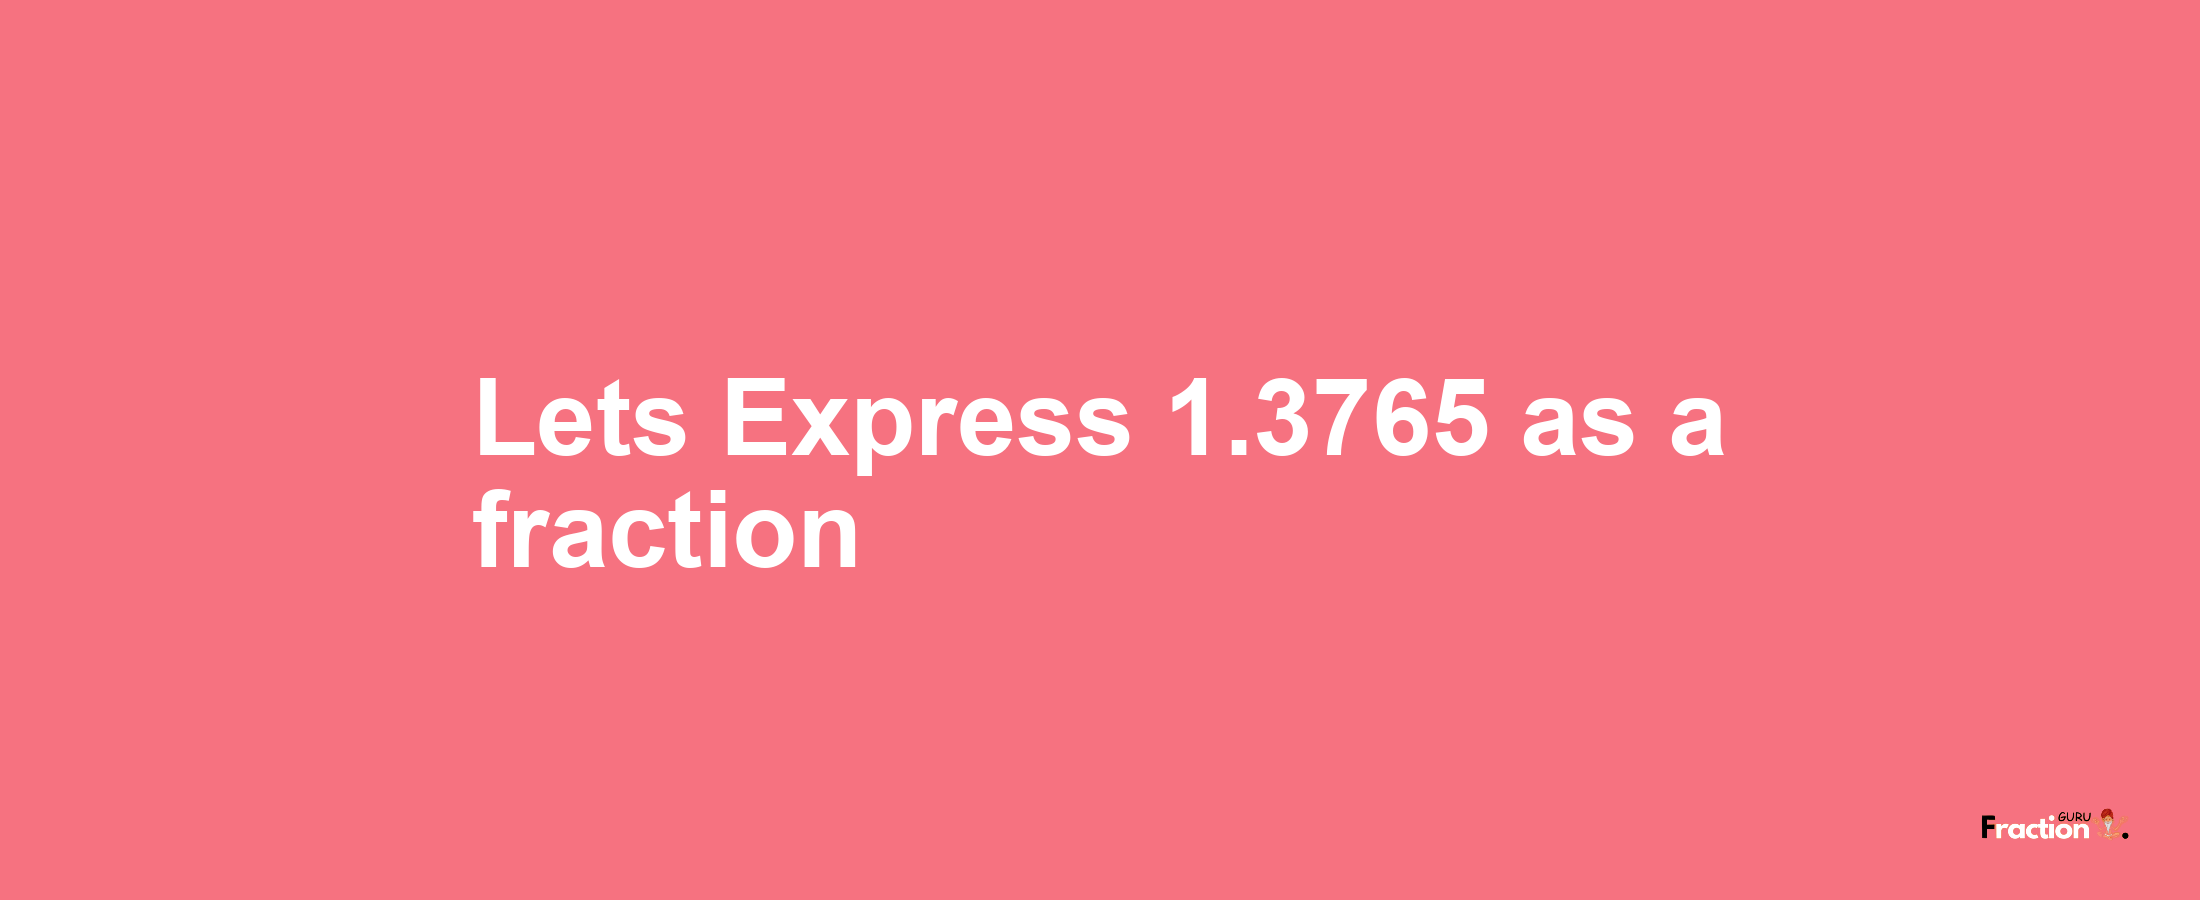 Lets Express 1.3765 as afraction